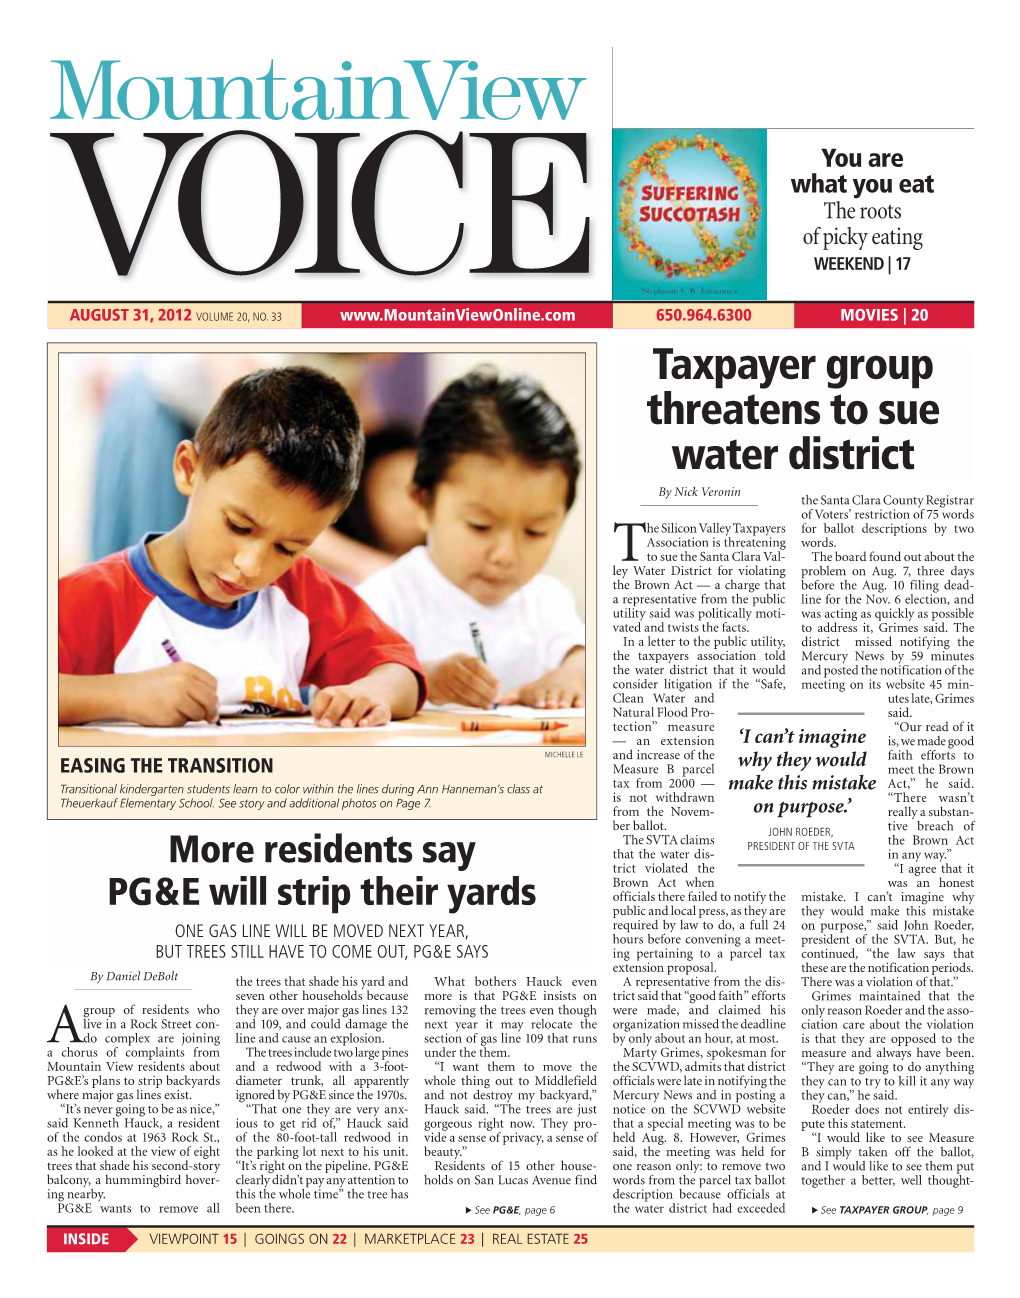 Taxpayer Group Threatens to Sue Water District